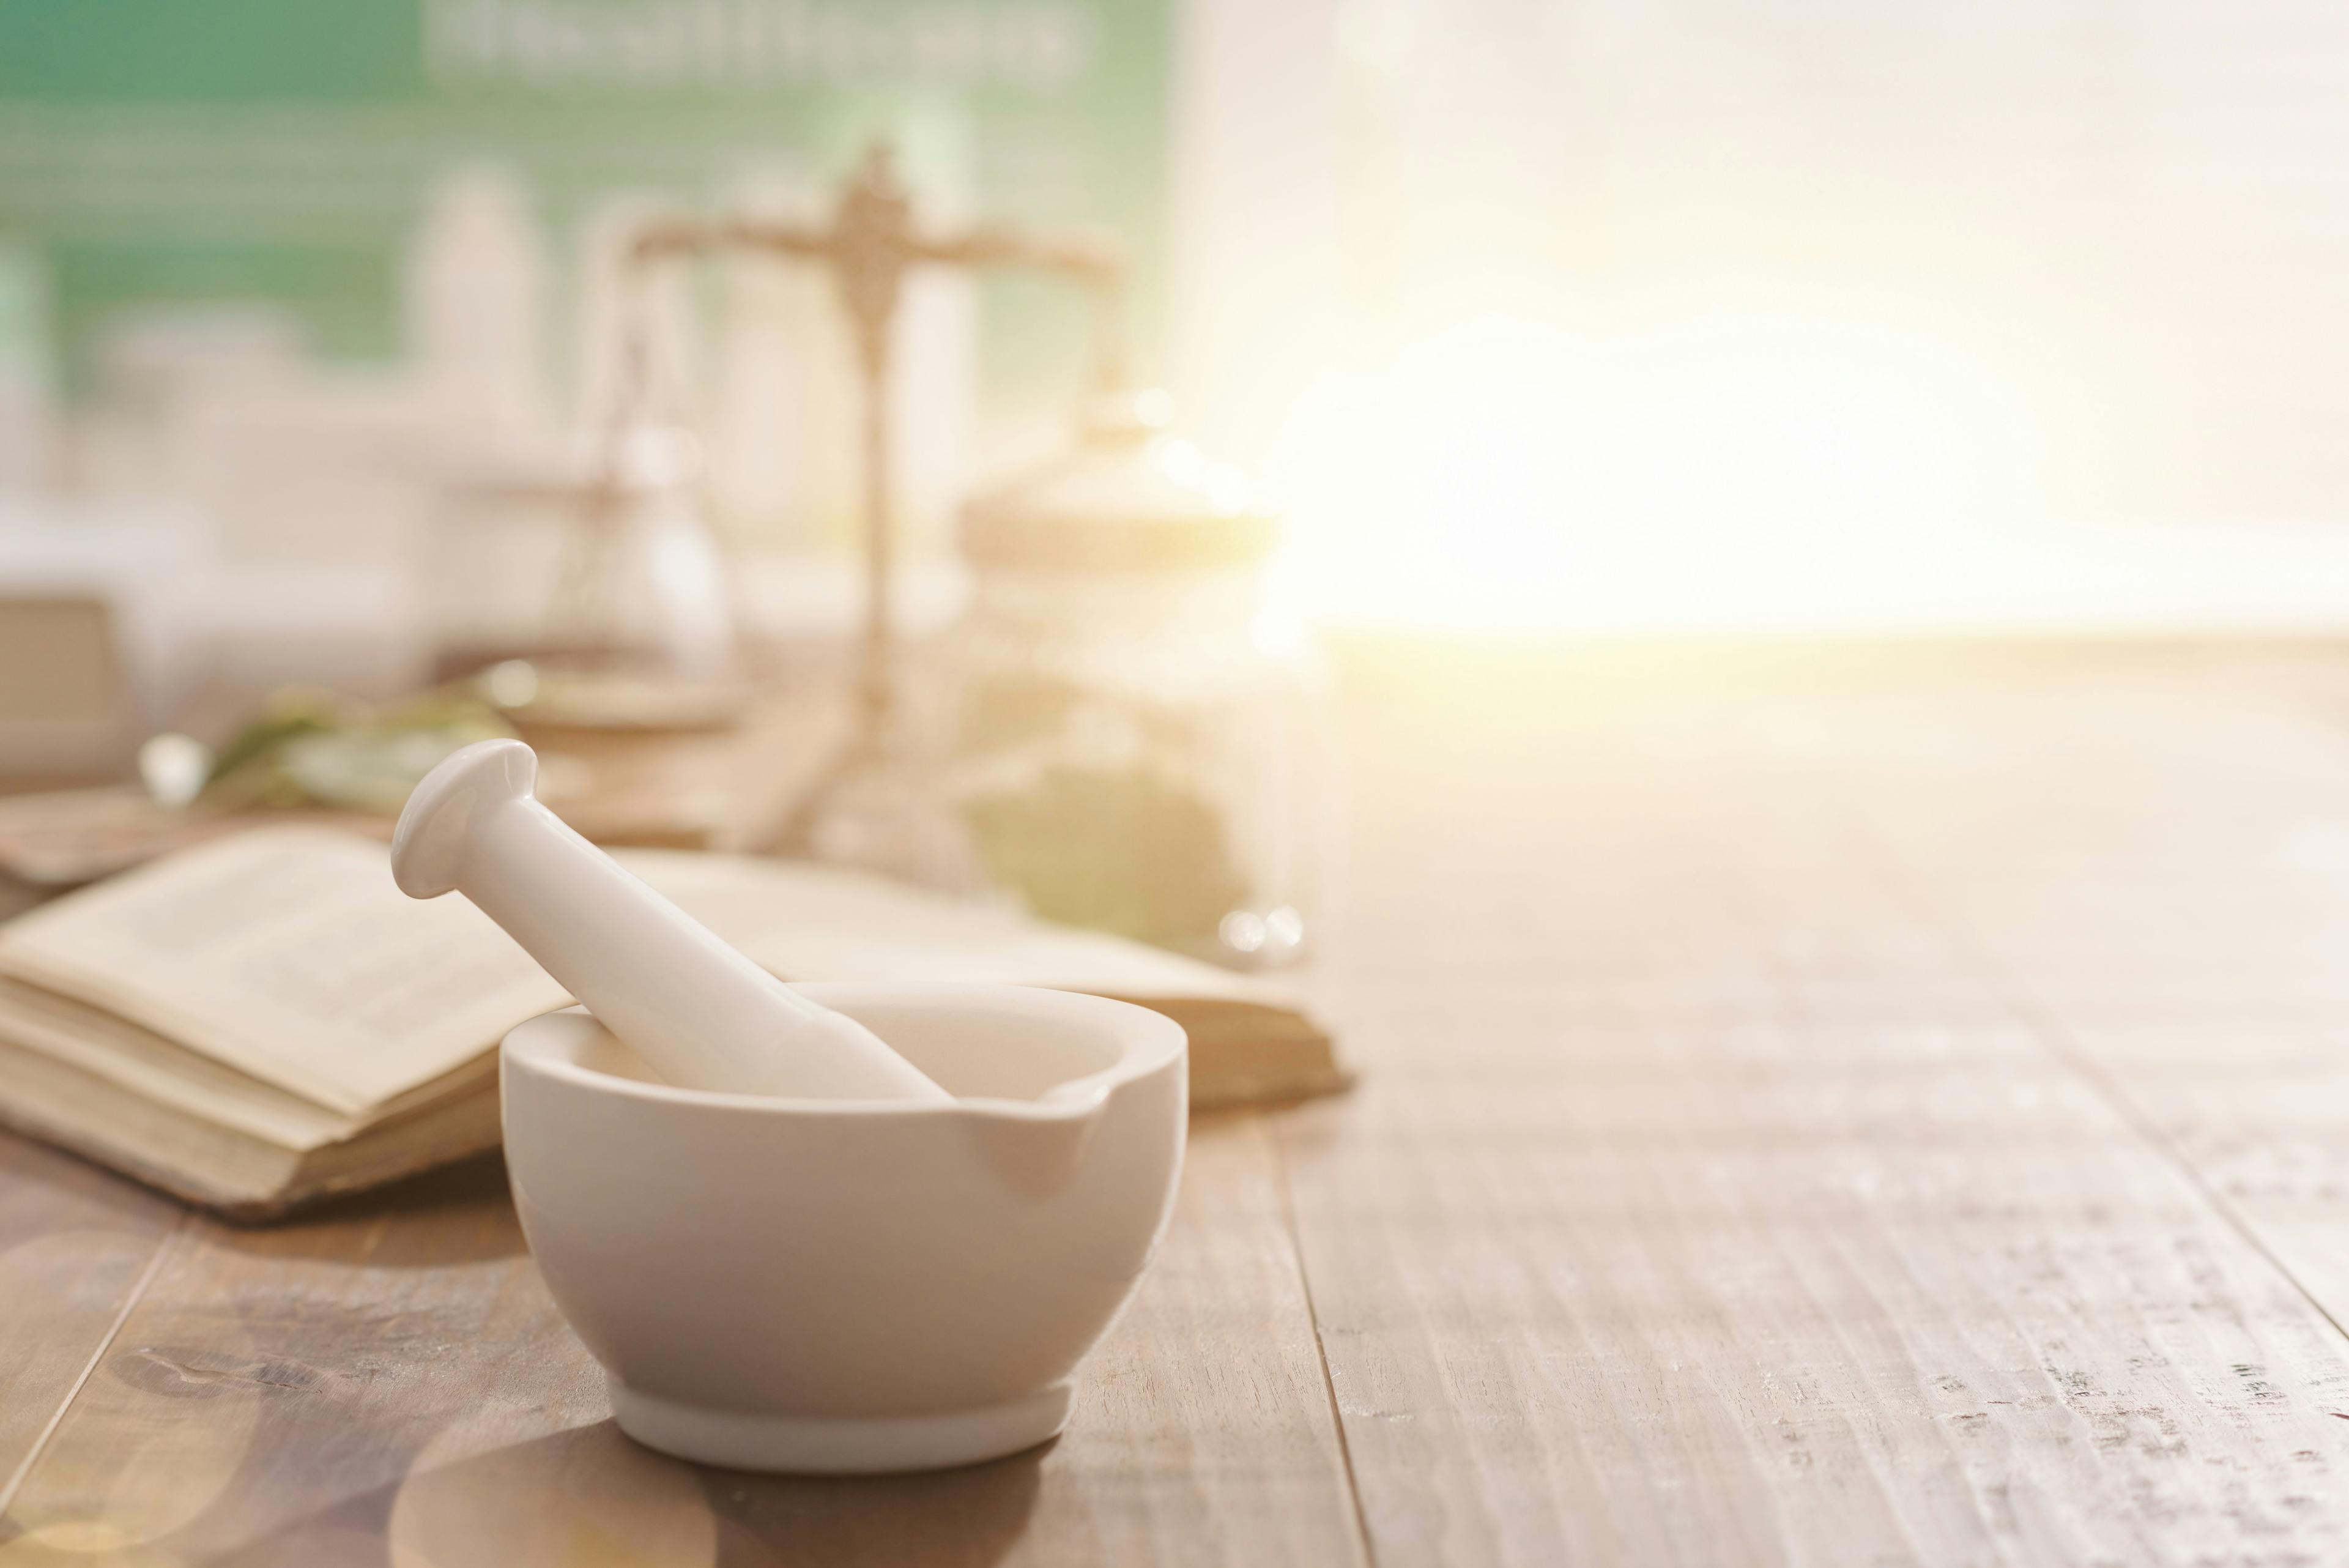 Mortar and pestle on the pharmacist's table- Image credit: StockPhotoPro | stock.adobe.com